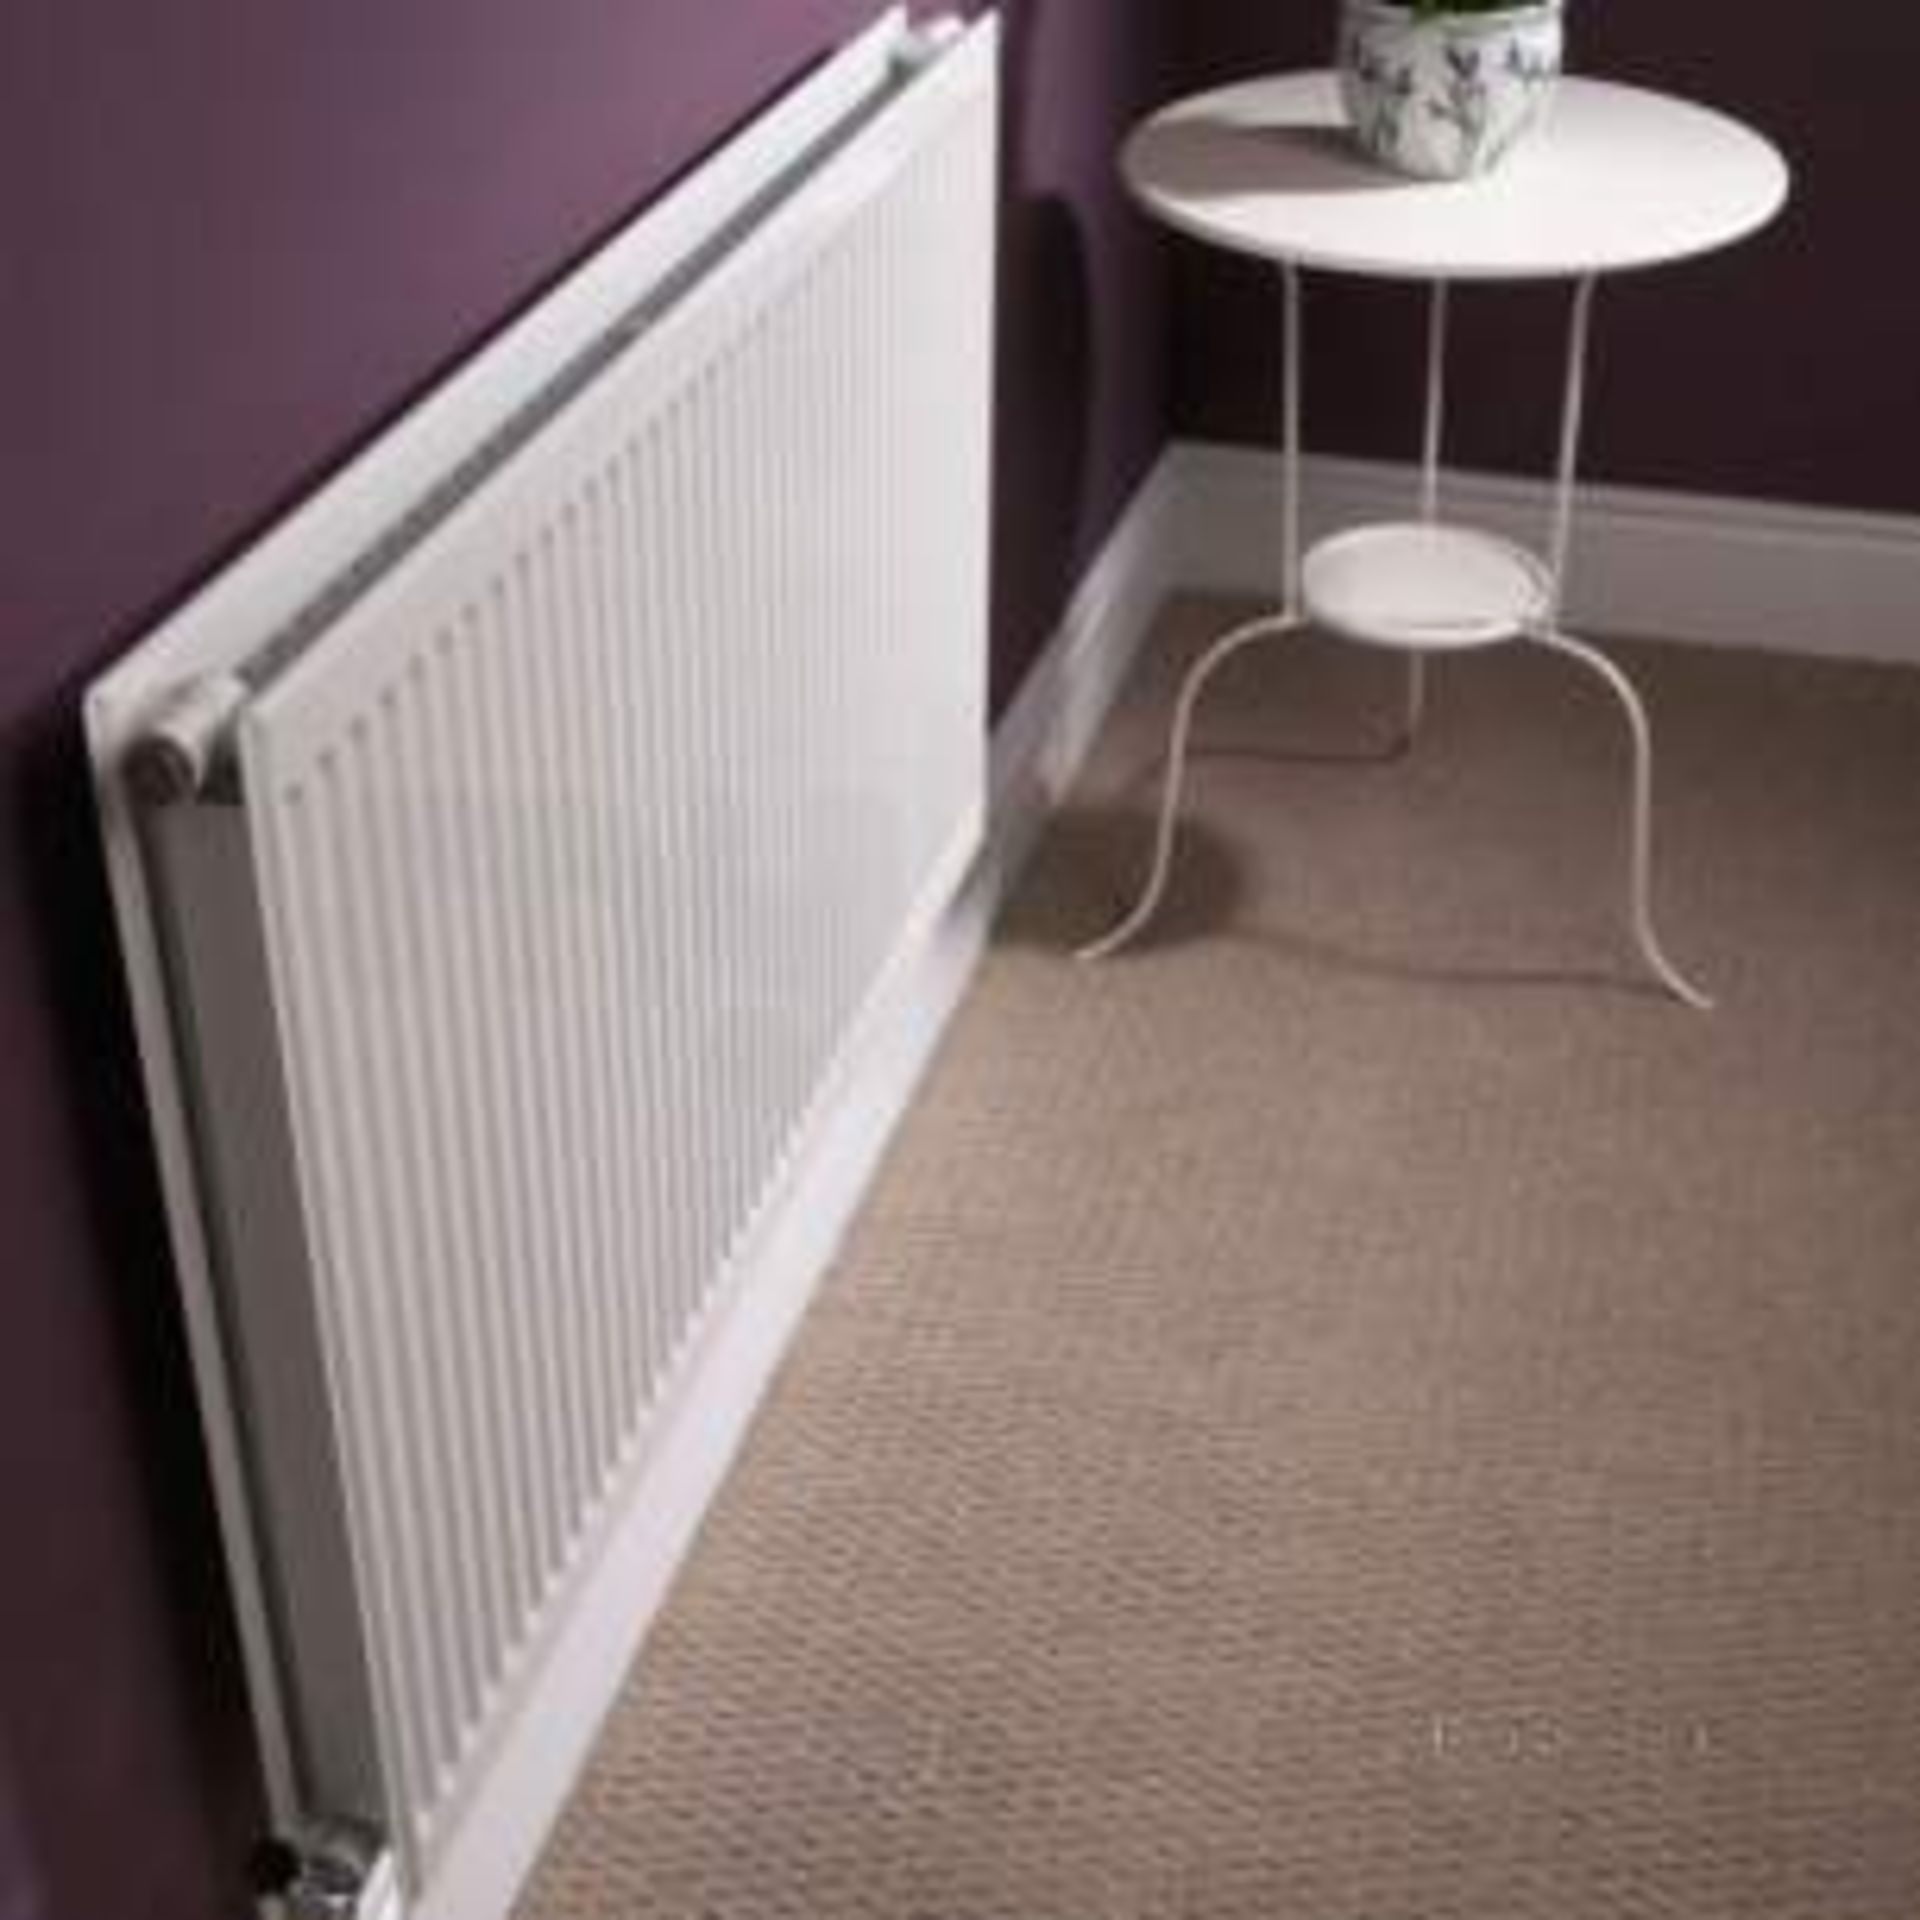 6 X Brand new sealed Quinn Round Top Double Panel Plus Radiator 400mm x 400mm (PLEASE NOTE COLLECTI